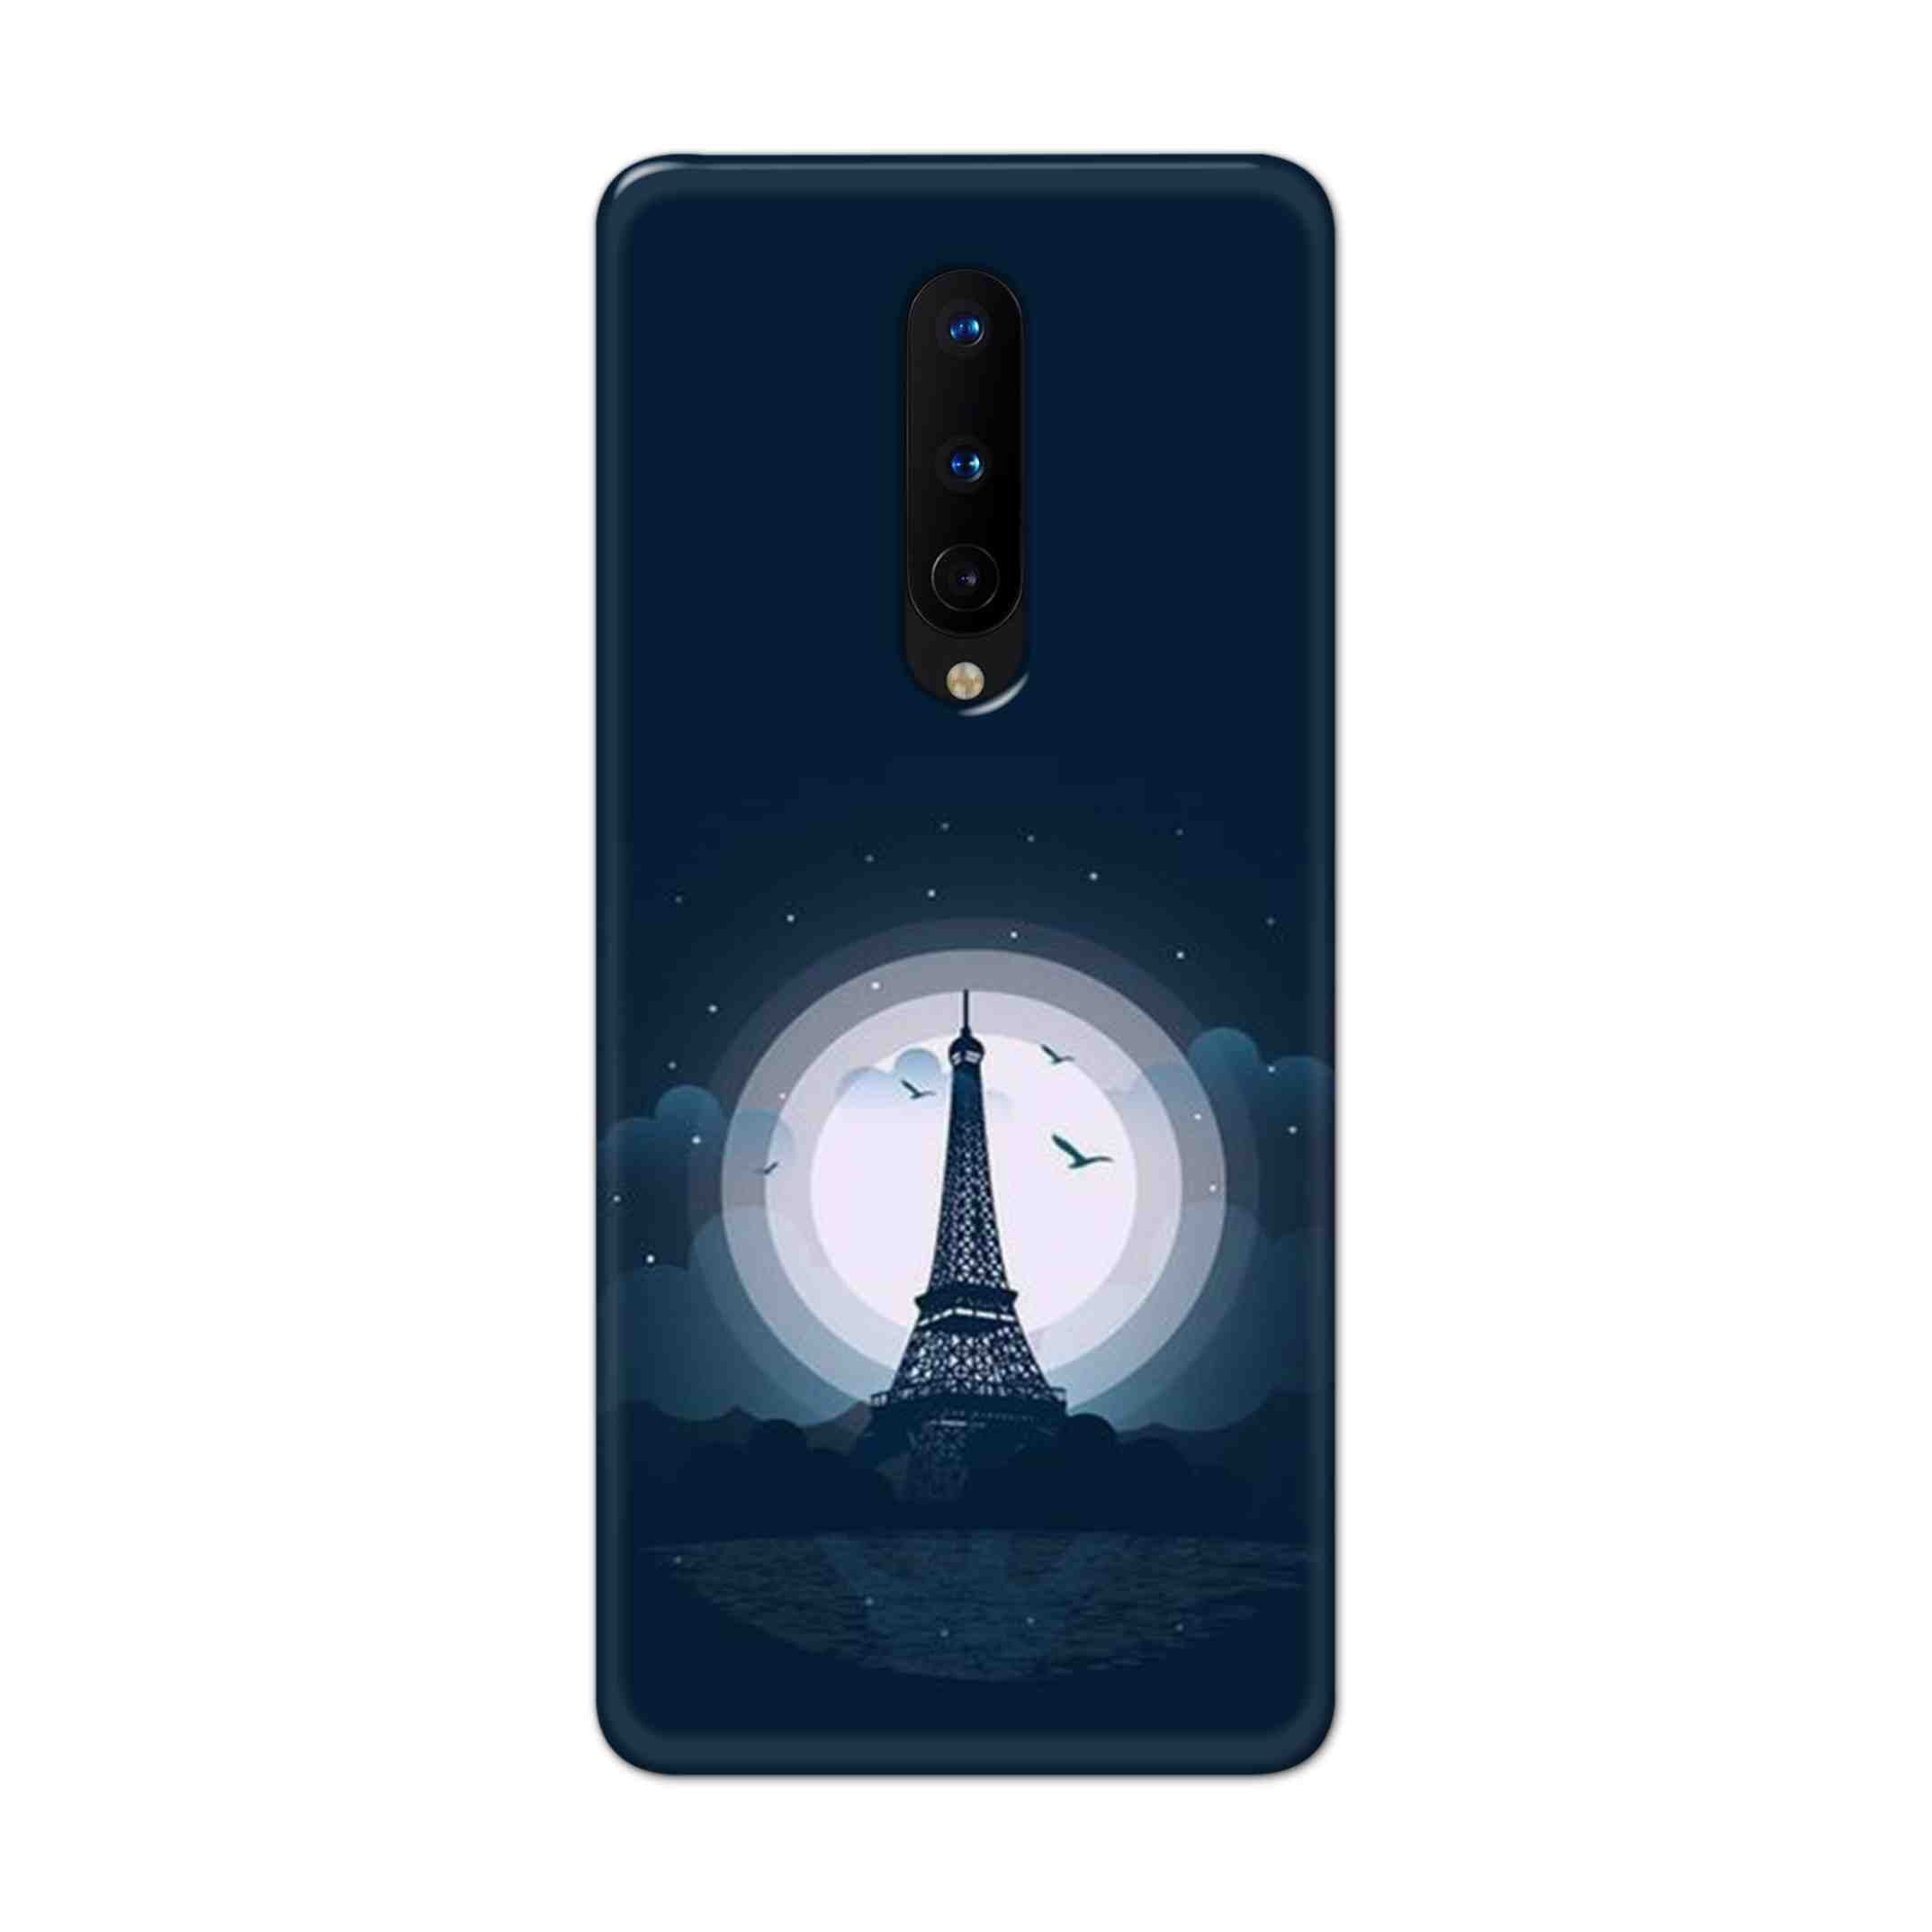 Buy Paris Eiffel Tower Hard Back Mobile Phone Case Cover For OnePlus 8 Online